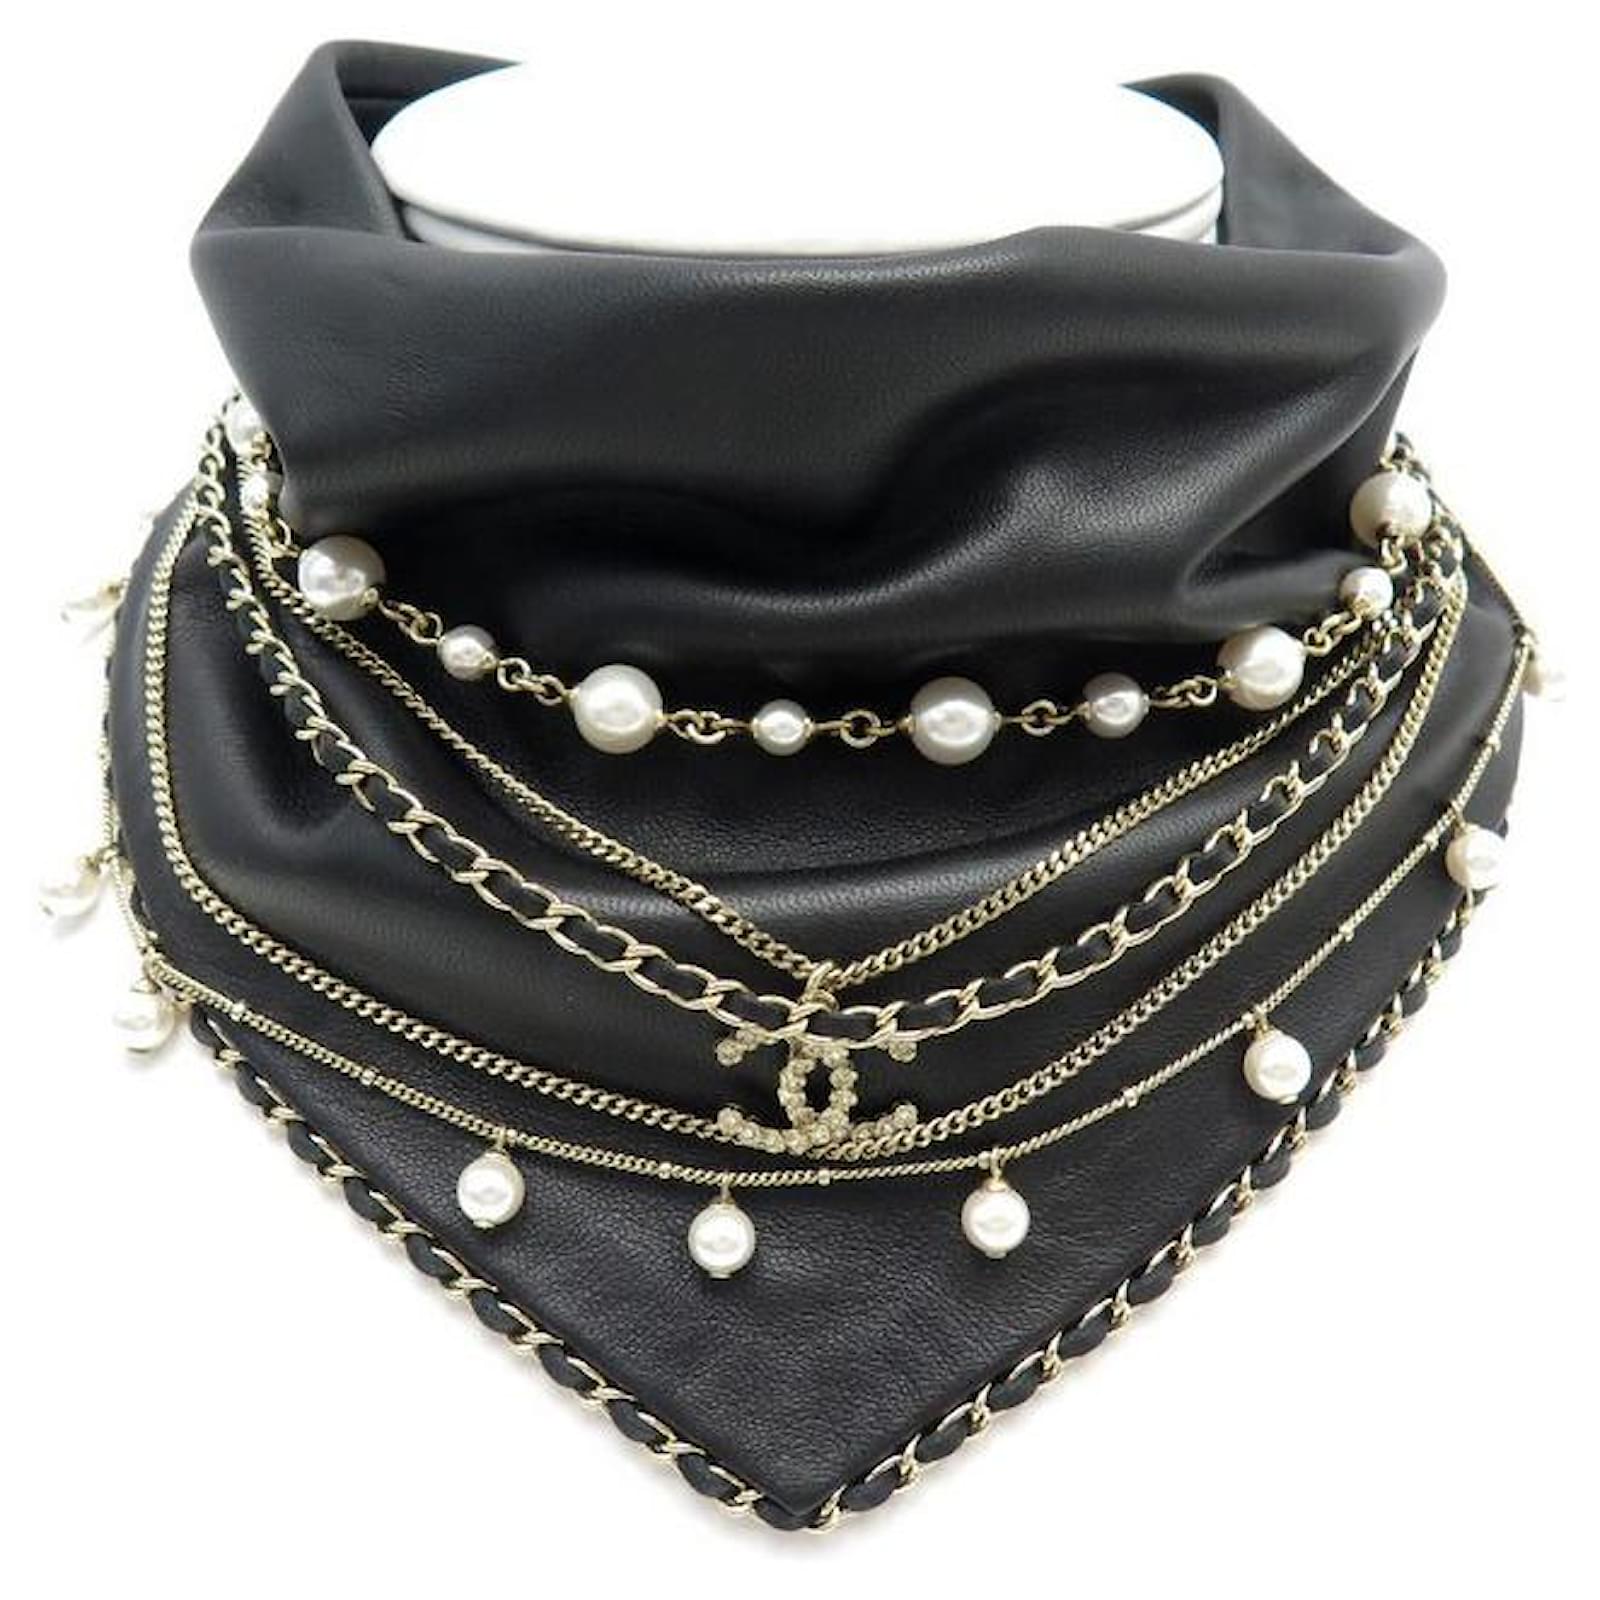 NEW CHANEL LEATHER BANDANA NECKLACE CHAIN LOGO CC PEARLS LEATHER